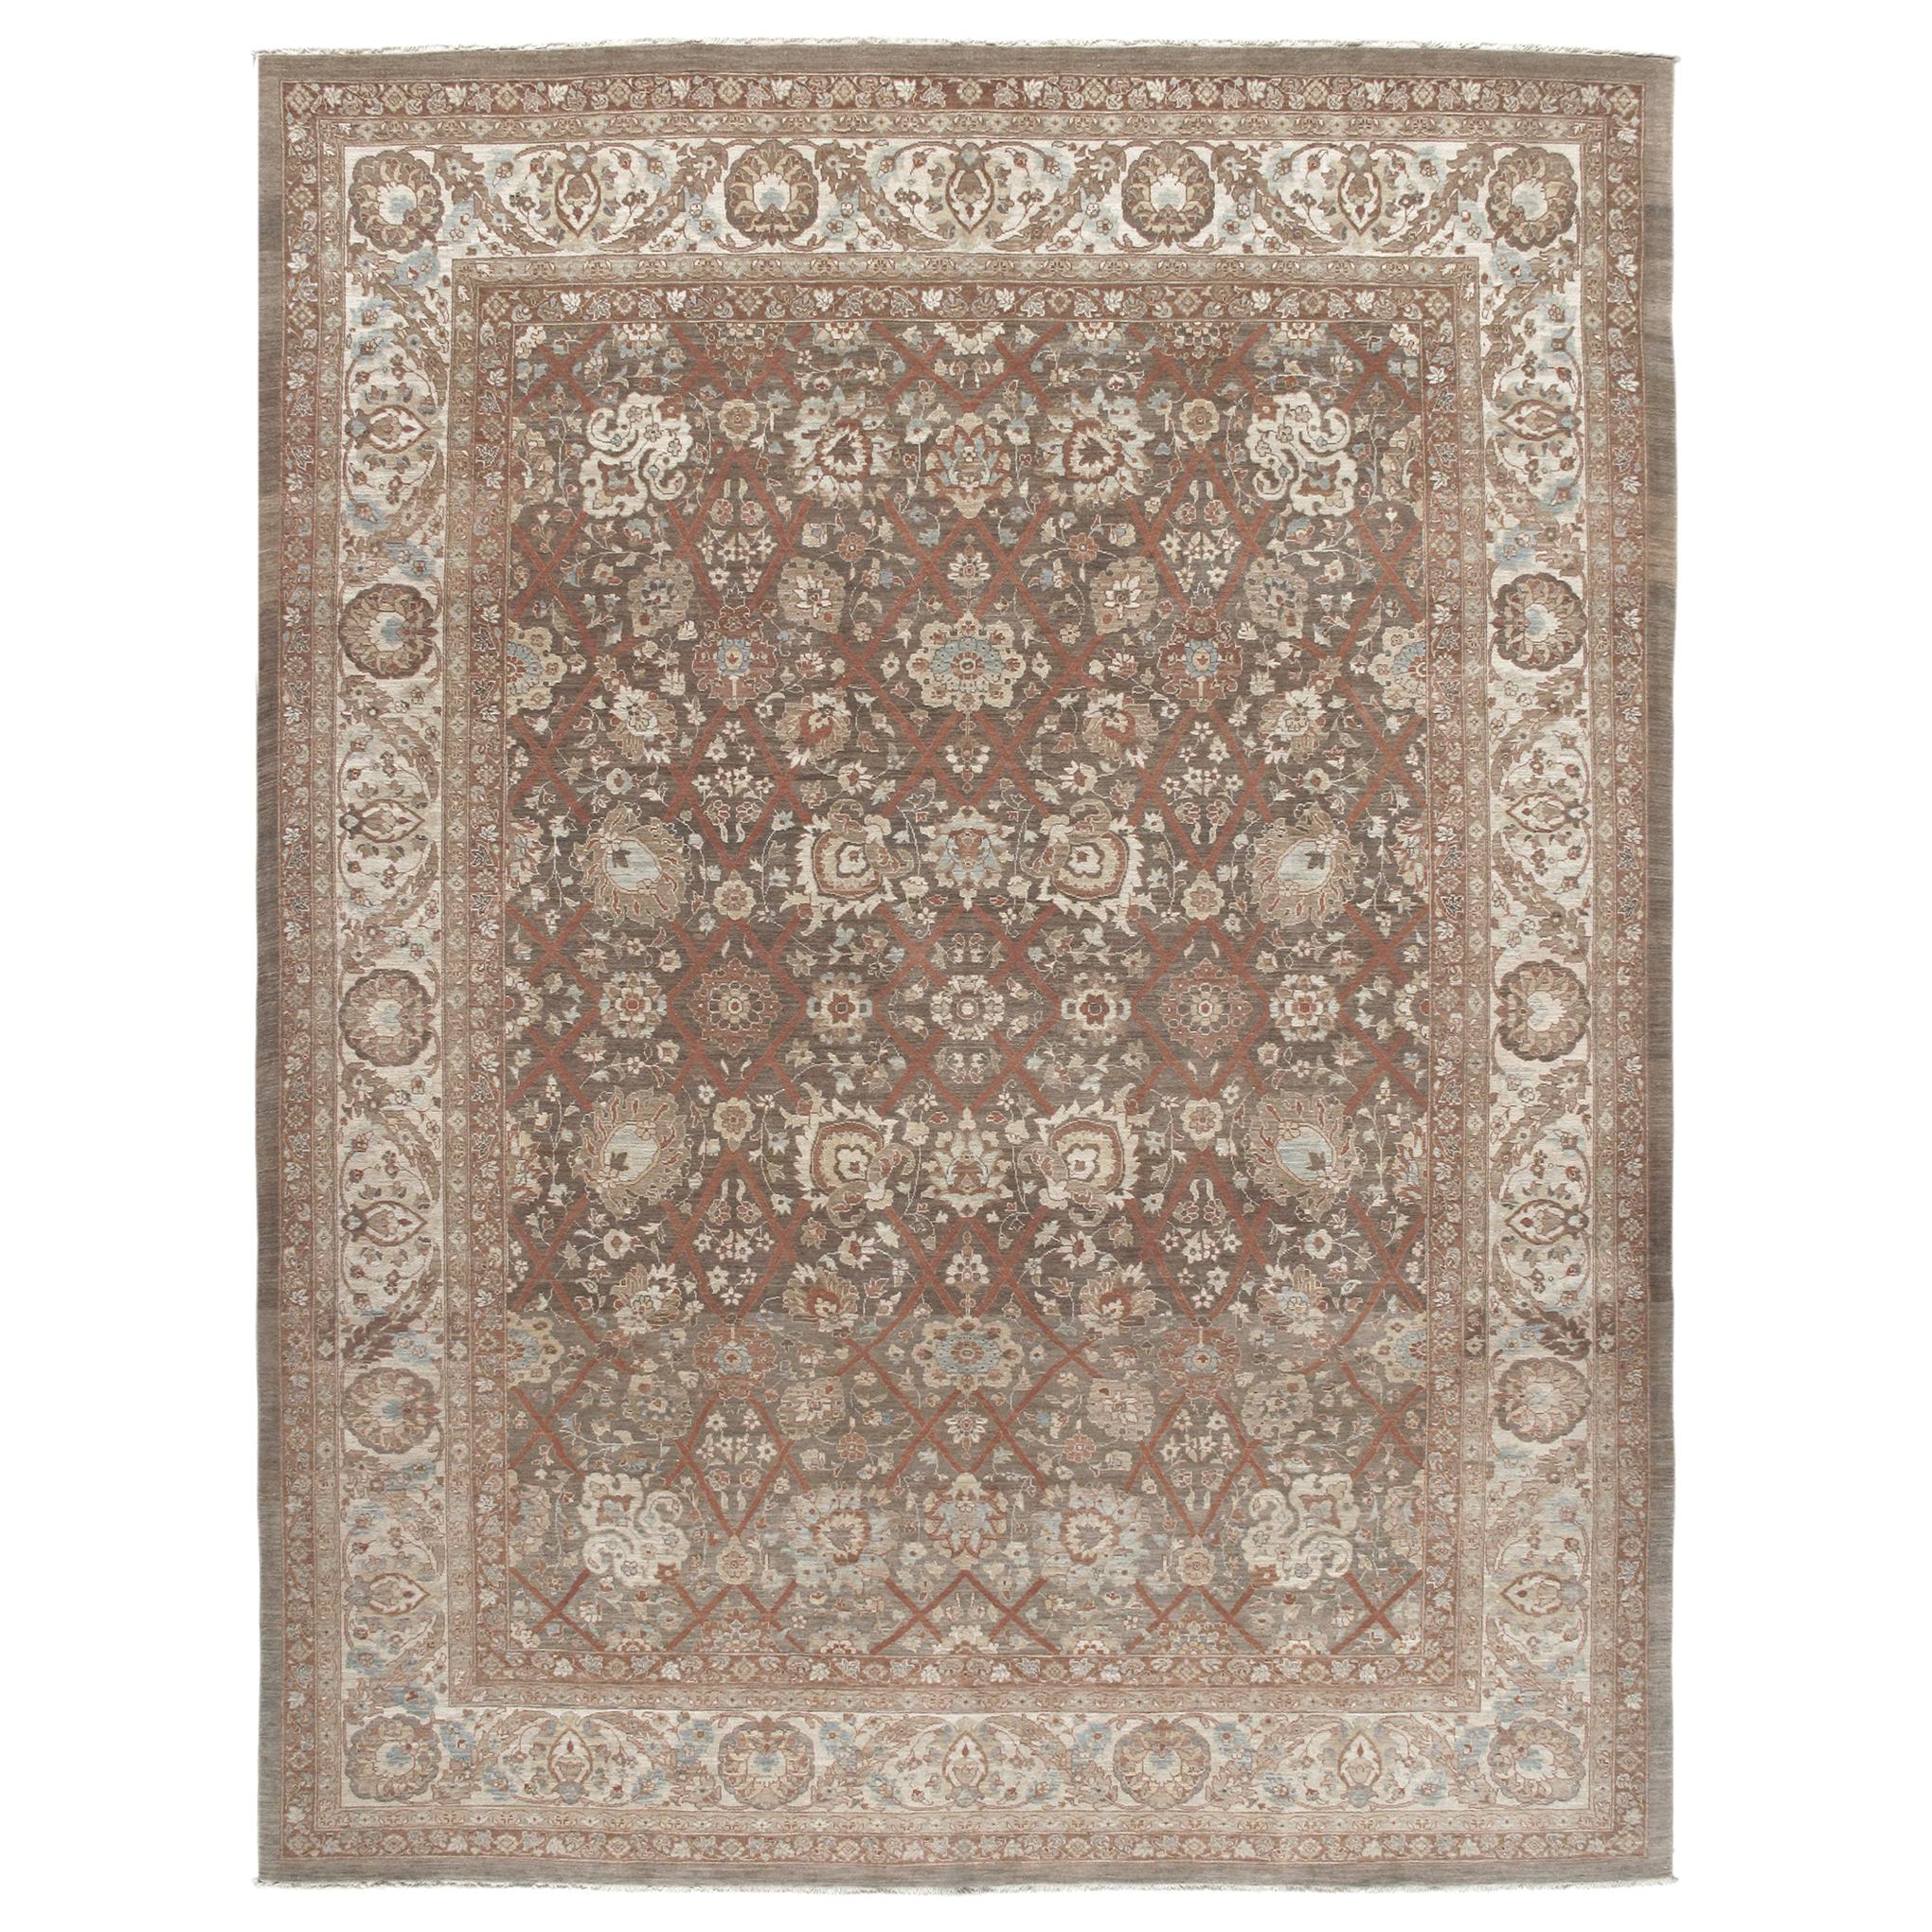 Persian Tabriz Hadji Jalili Style Handknotted Rug in Ivory, Brown and Rust Tones For Sale